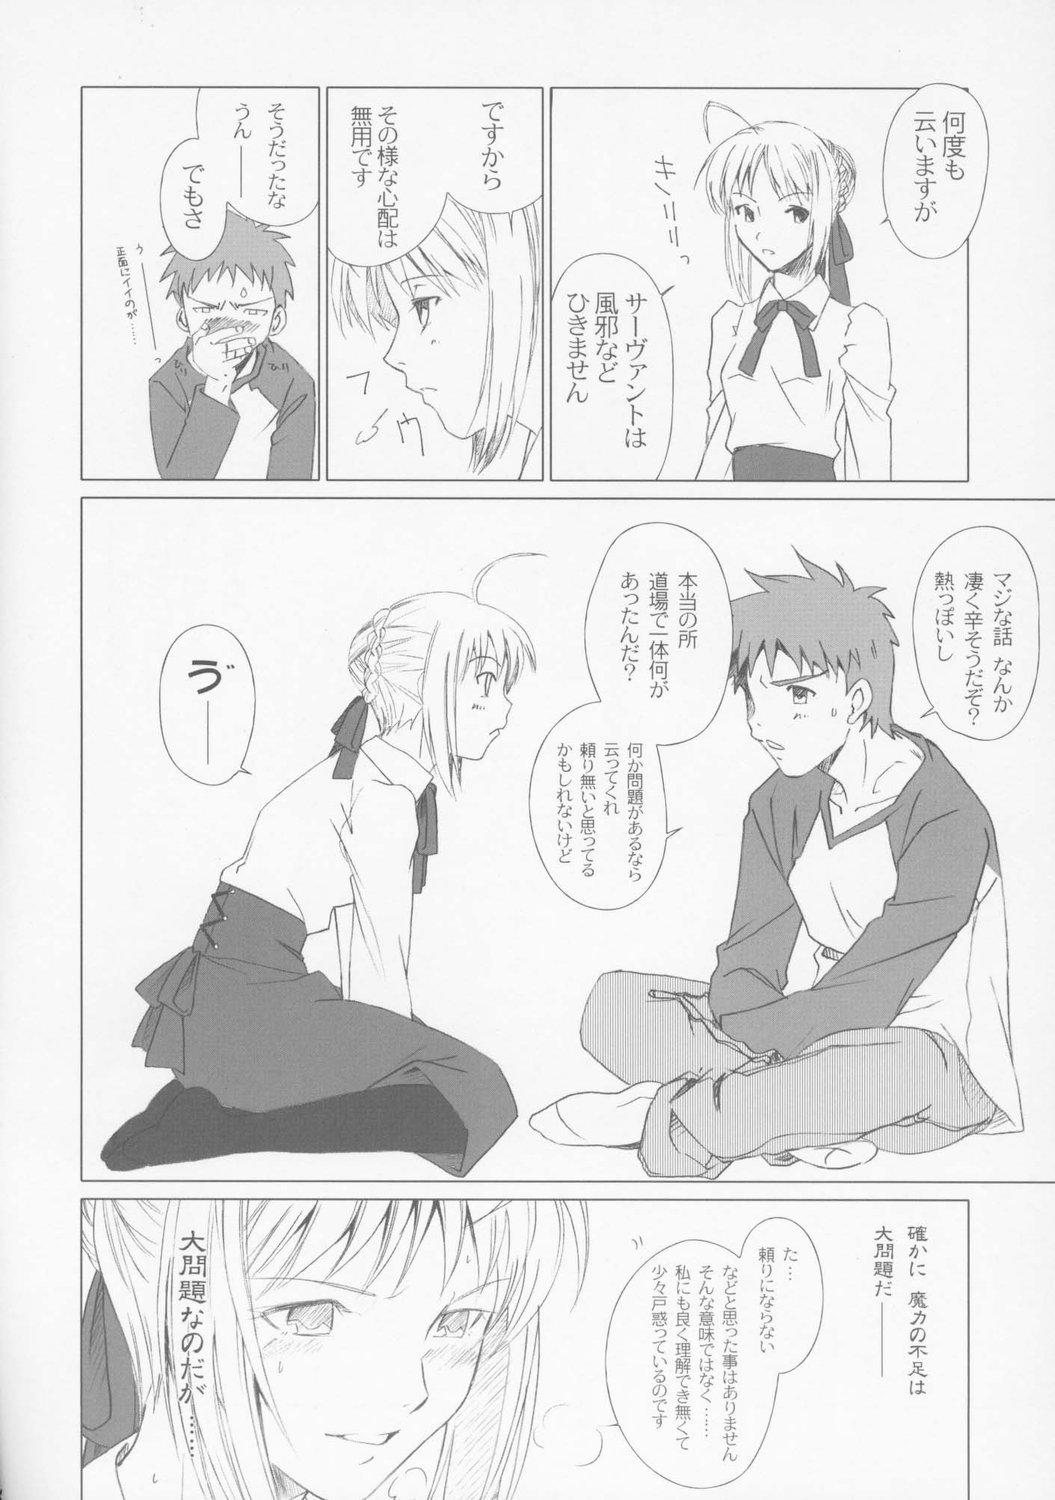 Handsome Eien no Uta - Ever Song - Fate stay night Fate hollow ataraxia Close Up - Page 10